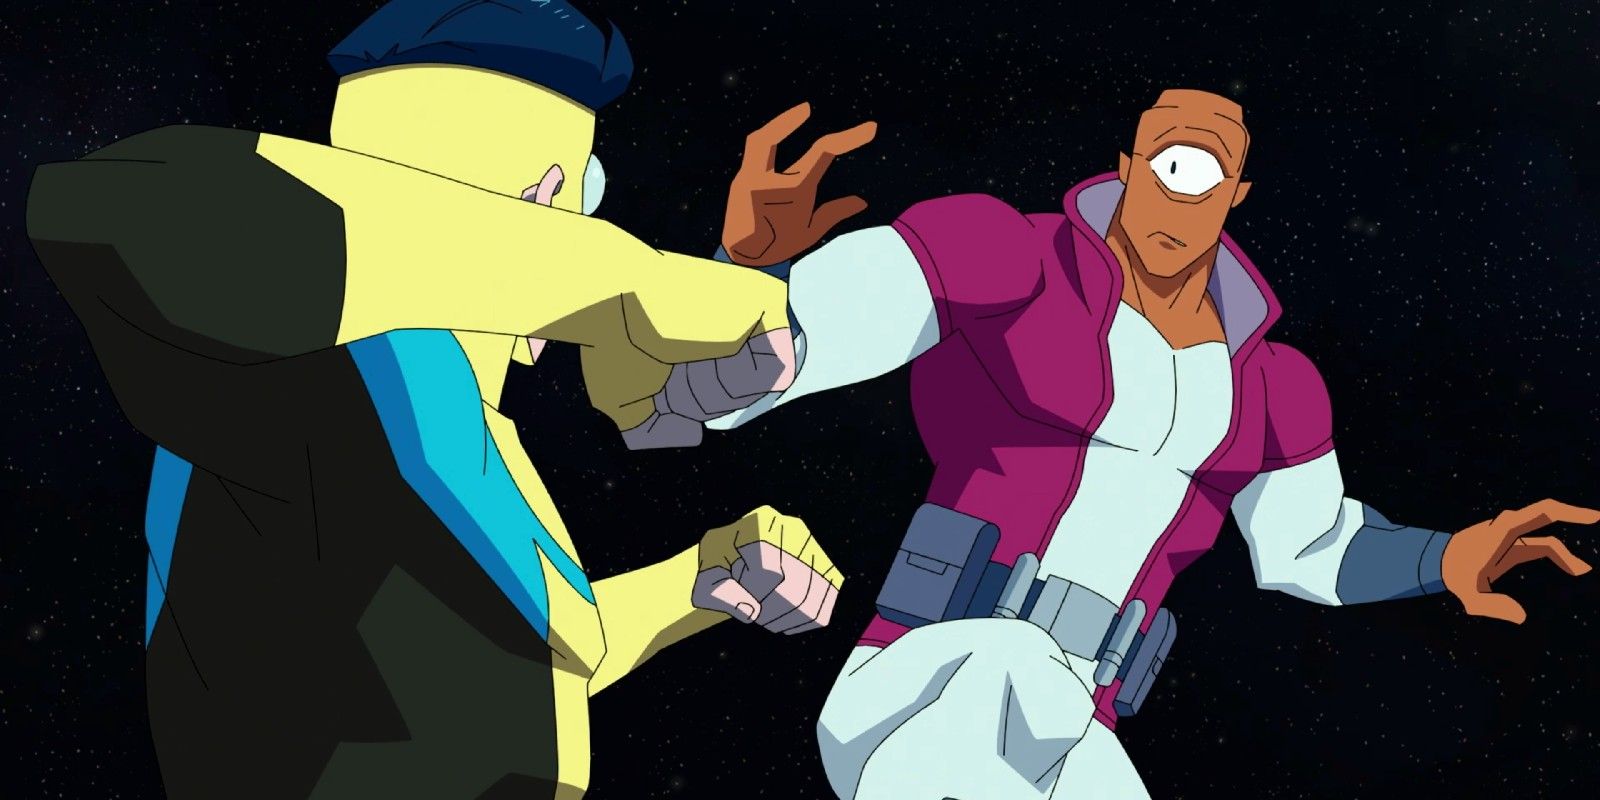 Invincible getting ready to Punch Allen the Alien